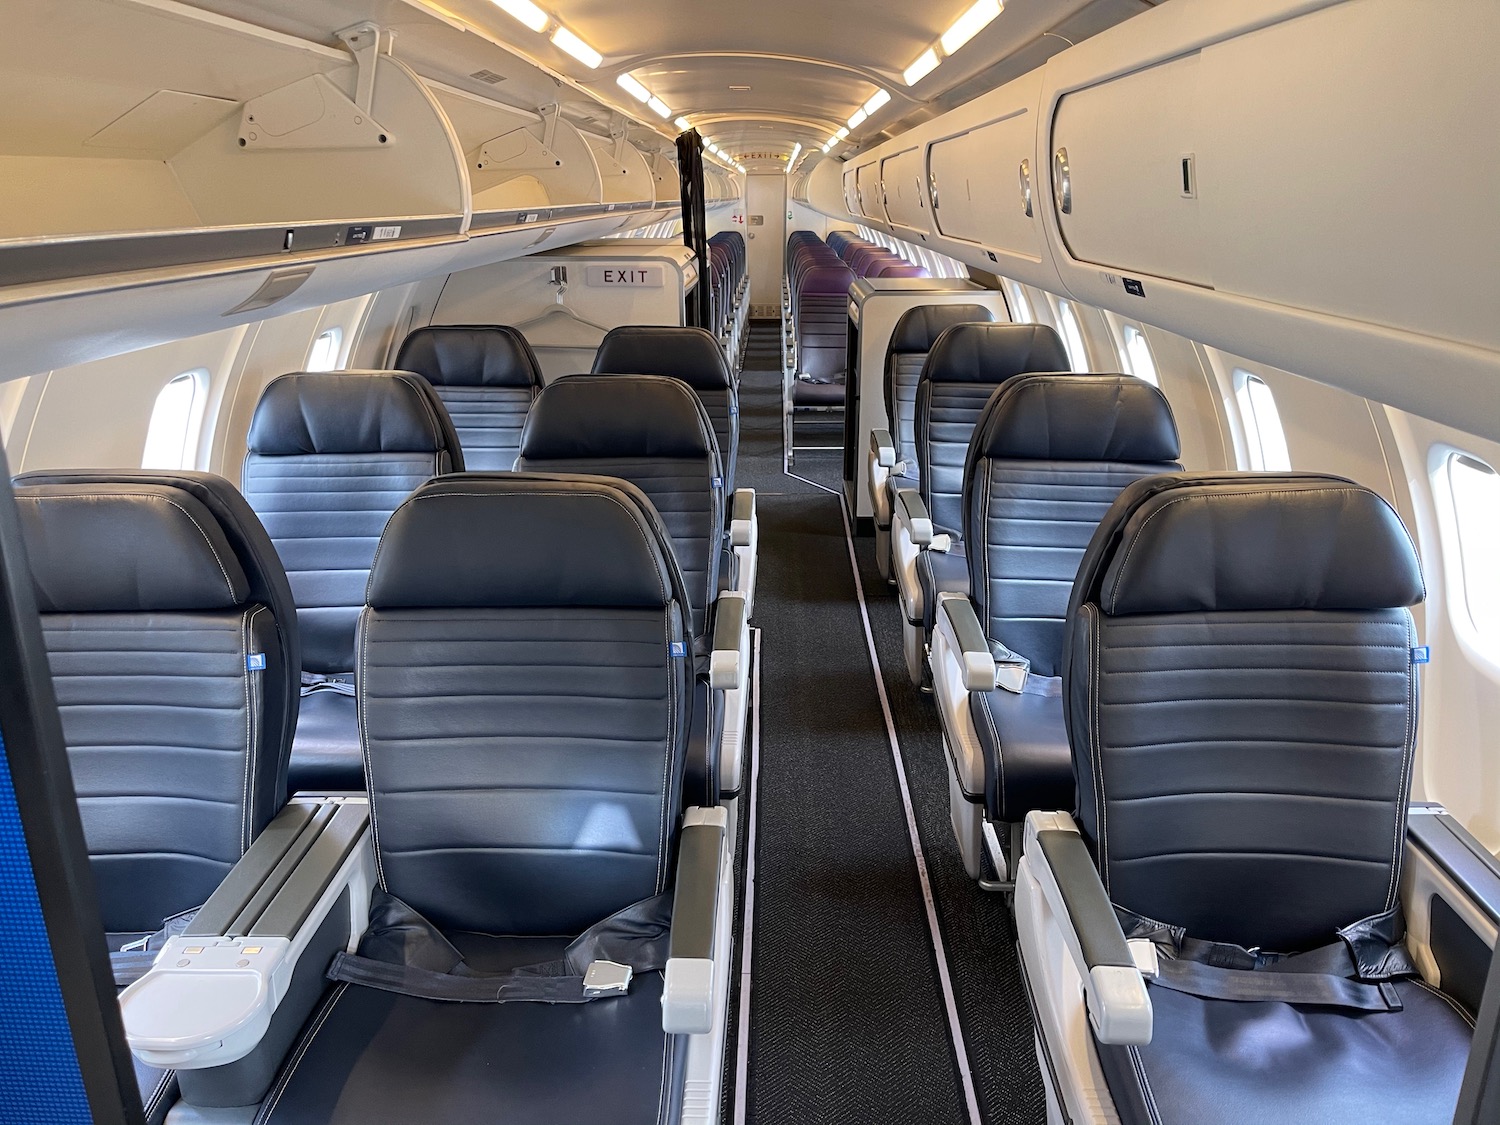 United and Delta Both Unveiled Their New CRJ-550 Regional Jets With Walk-Up Bars